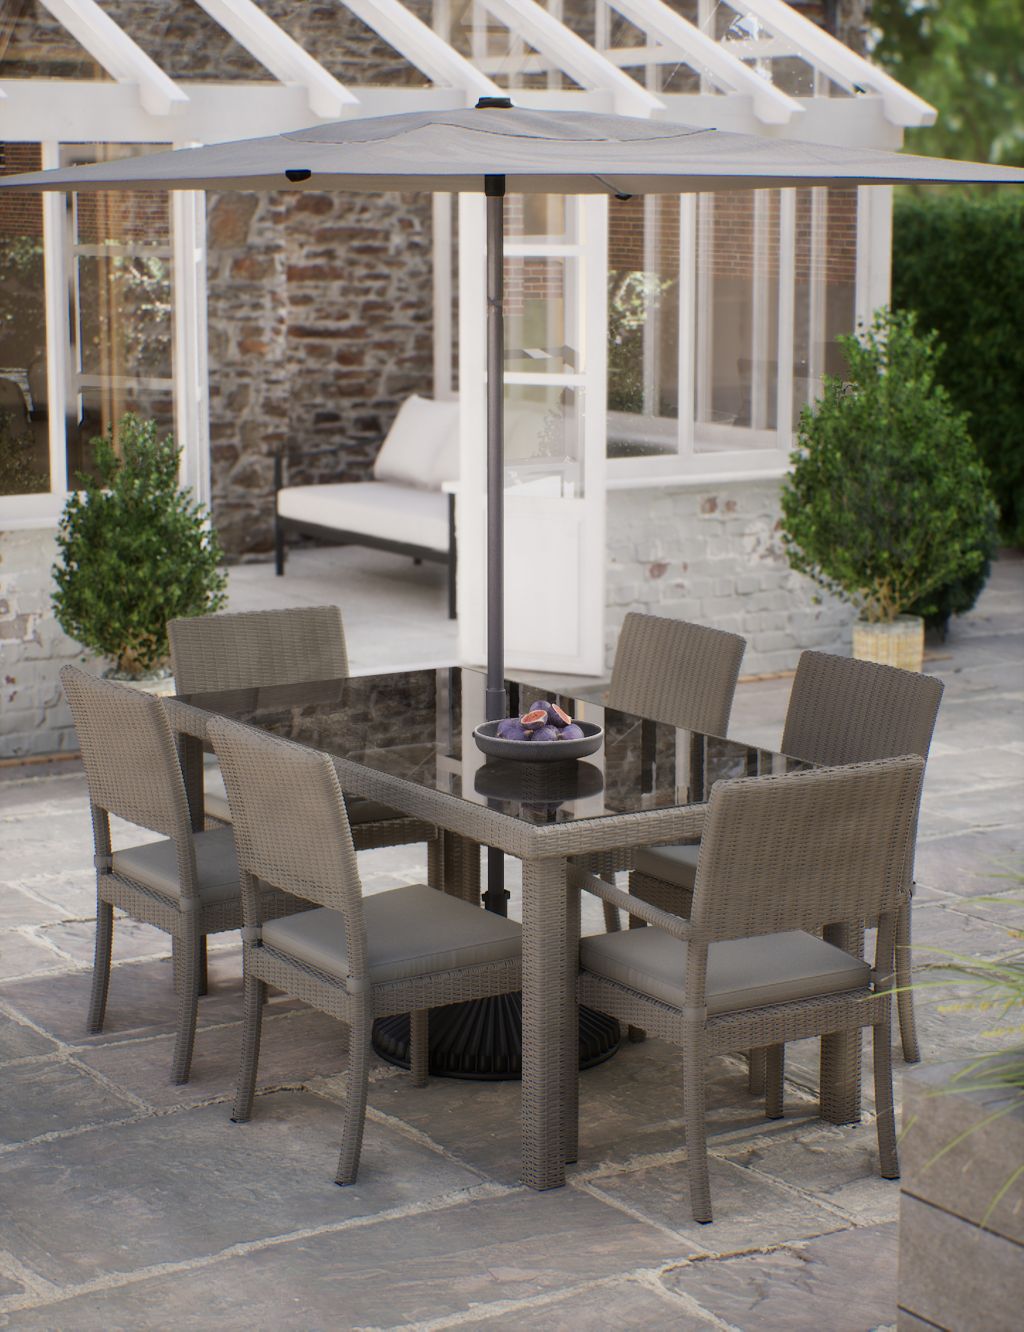 Marlow 6 Seater Rattan Effect Garden Dining Table & Chairs